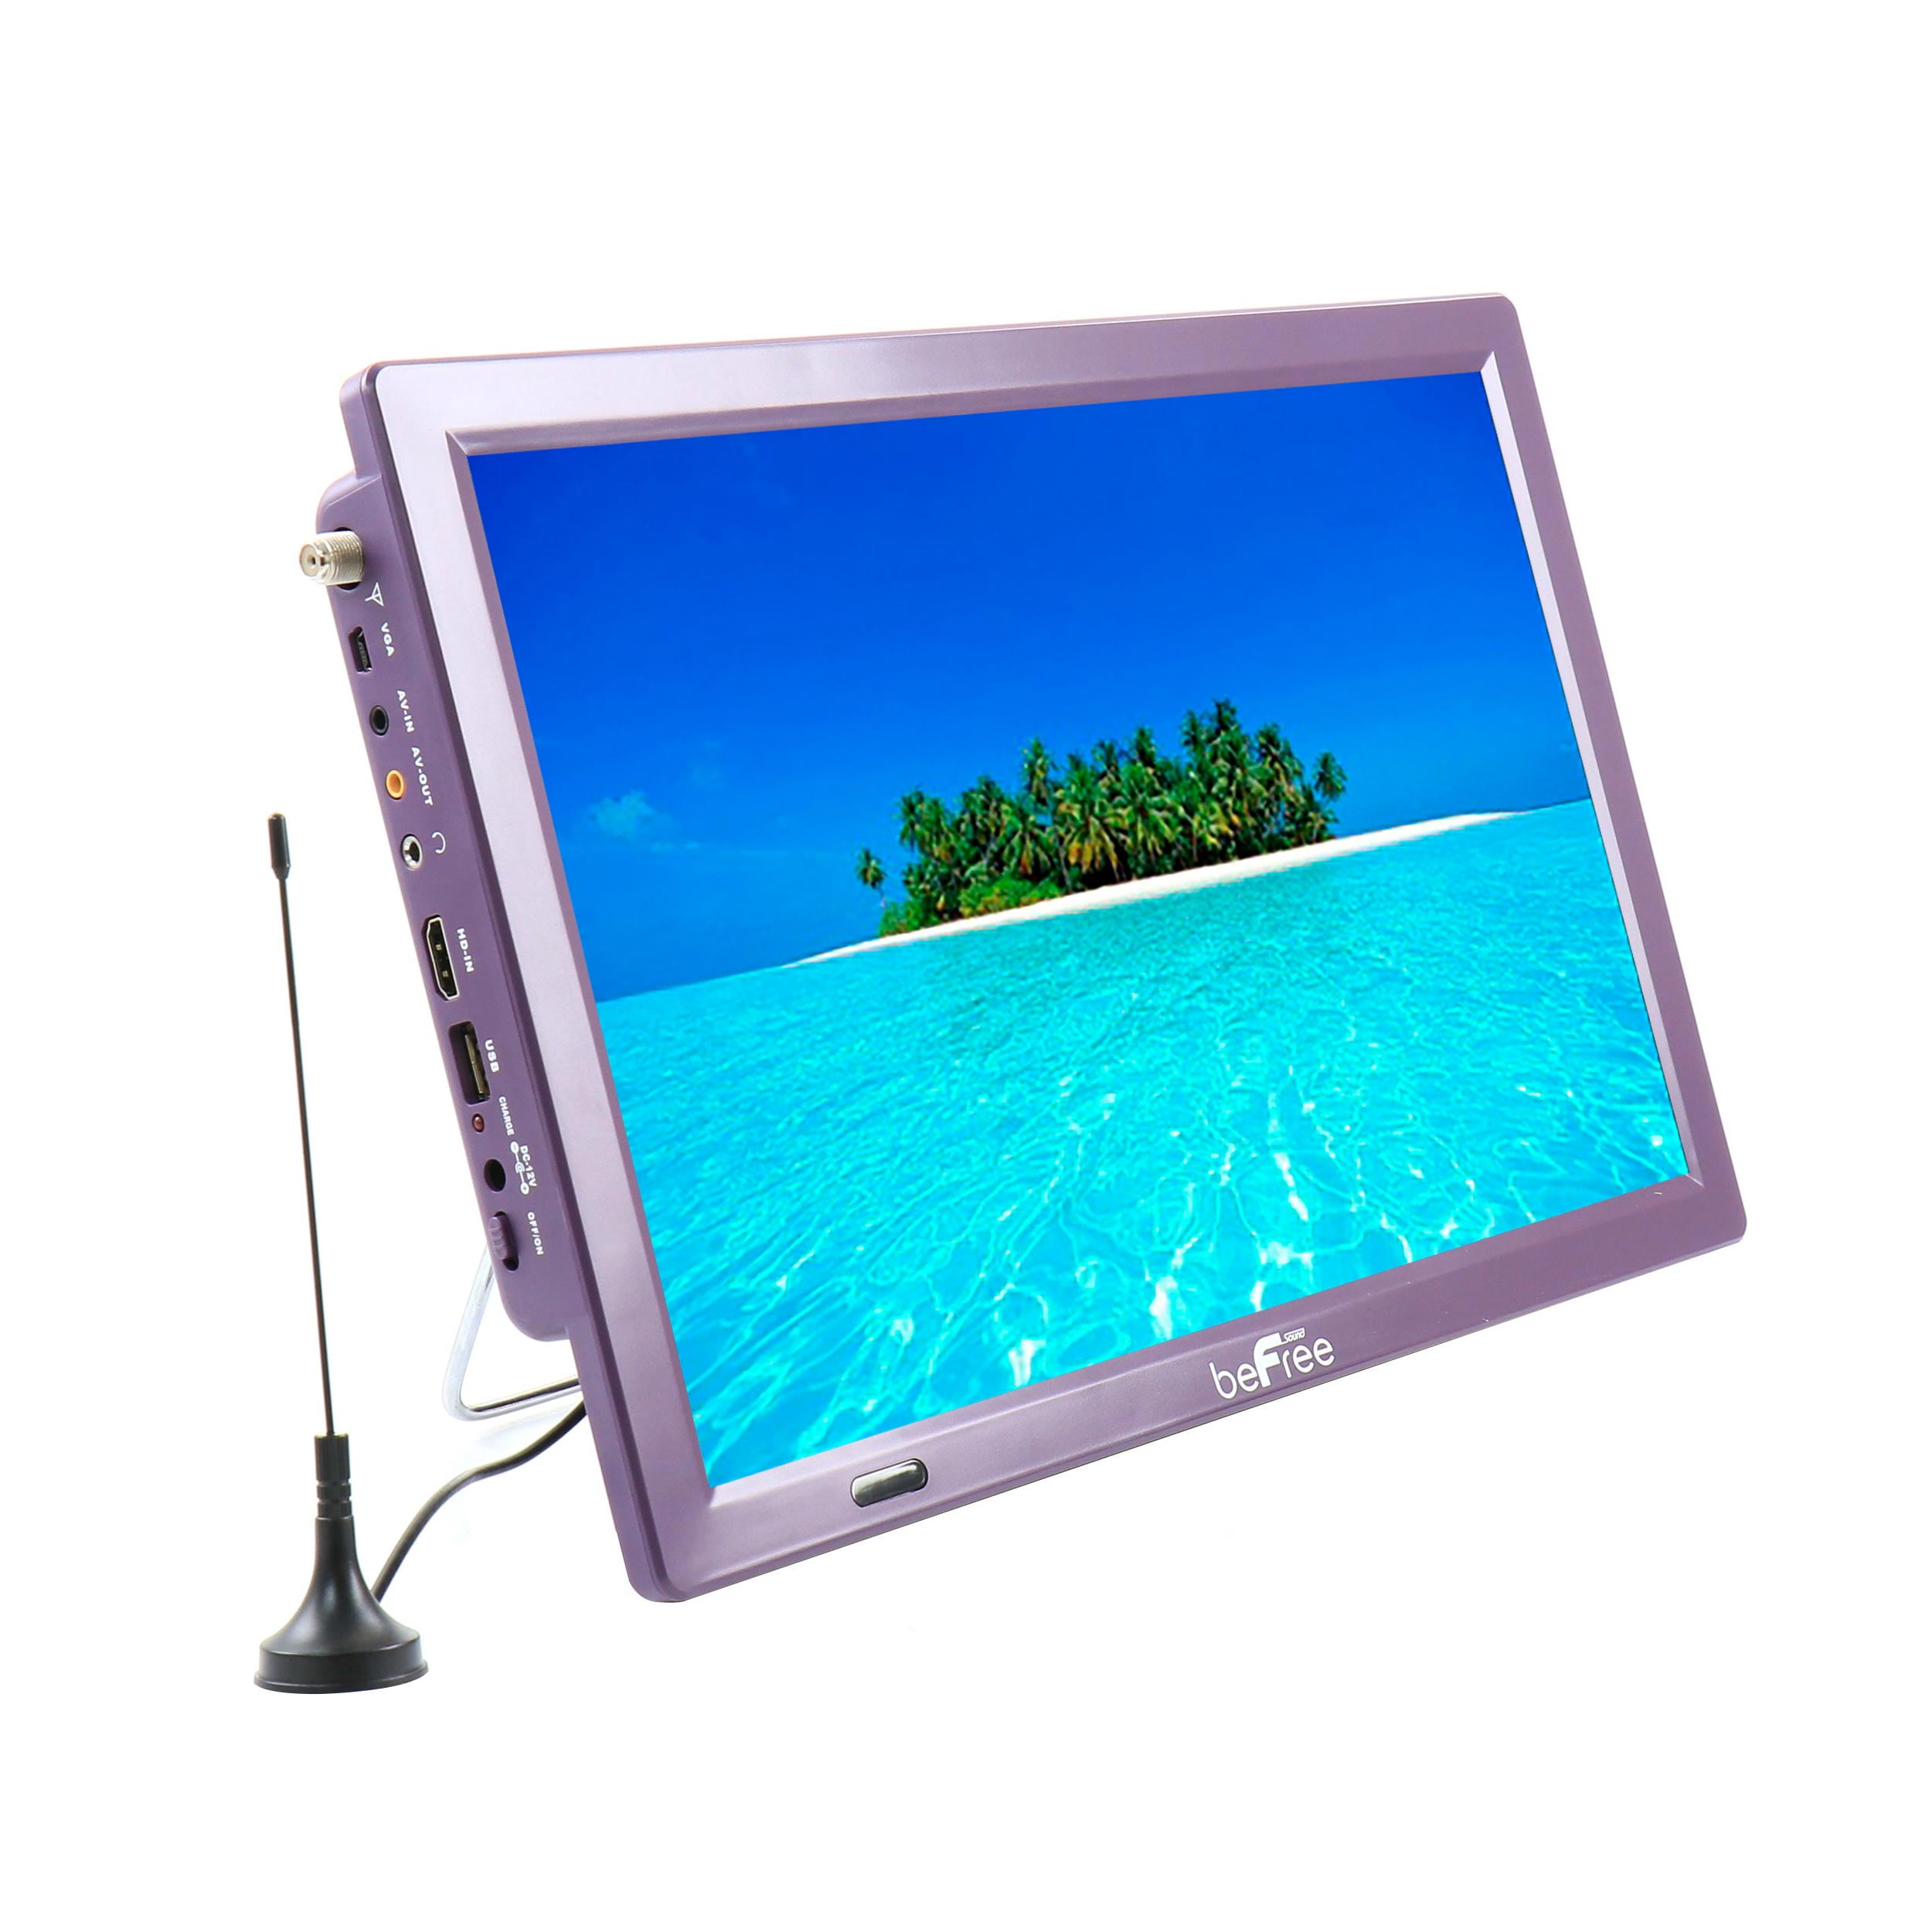 beFree Sound Portable 14 Inch LED TV with HDMI, SD/MMC, USB, VGA, AV and Built-in Digital Tuner in Purple - Walmart.com